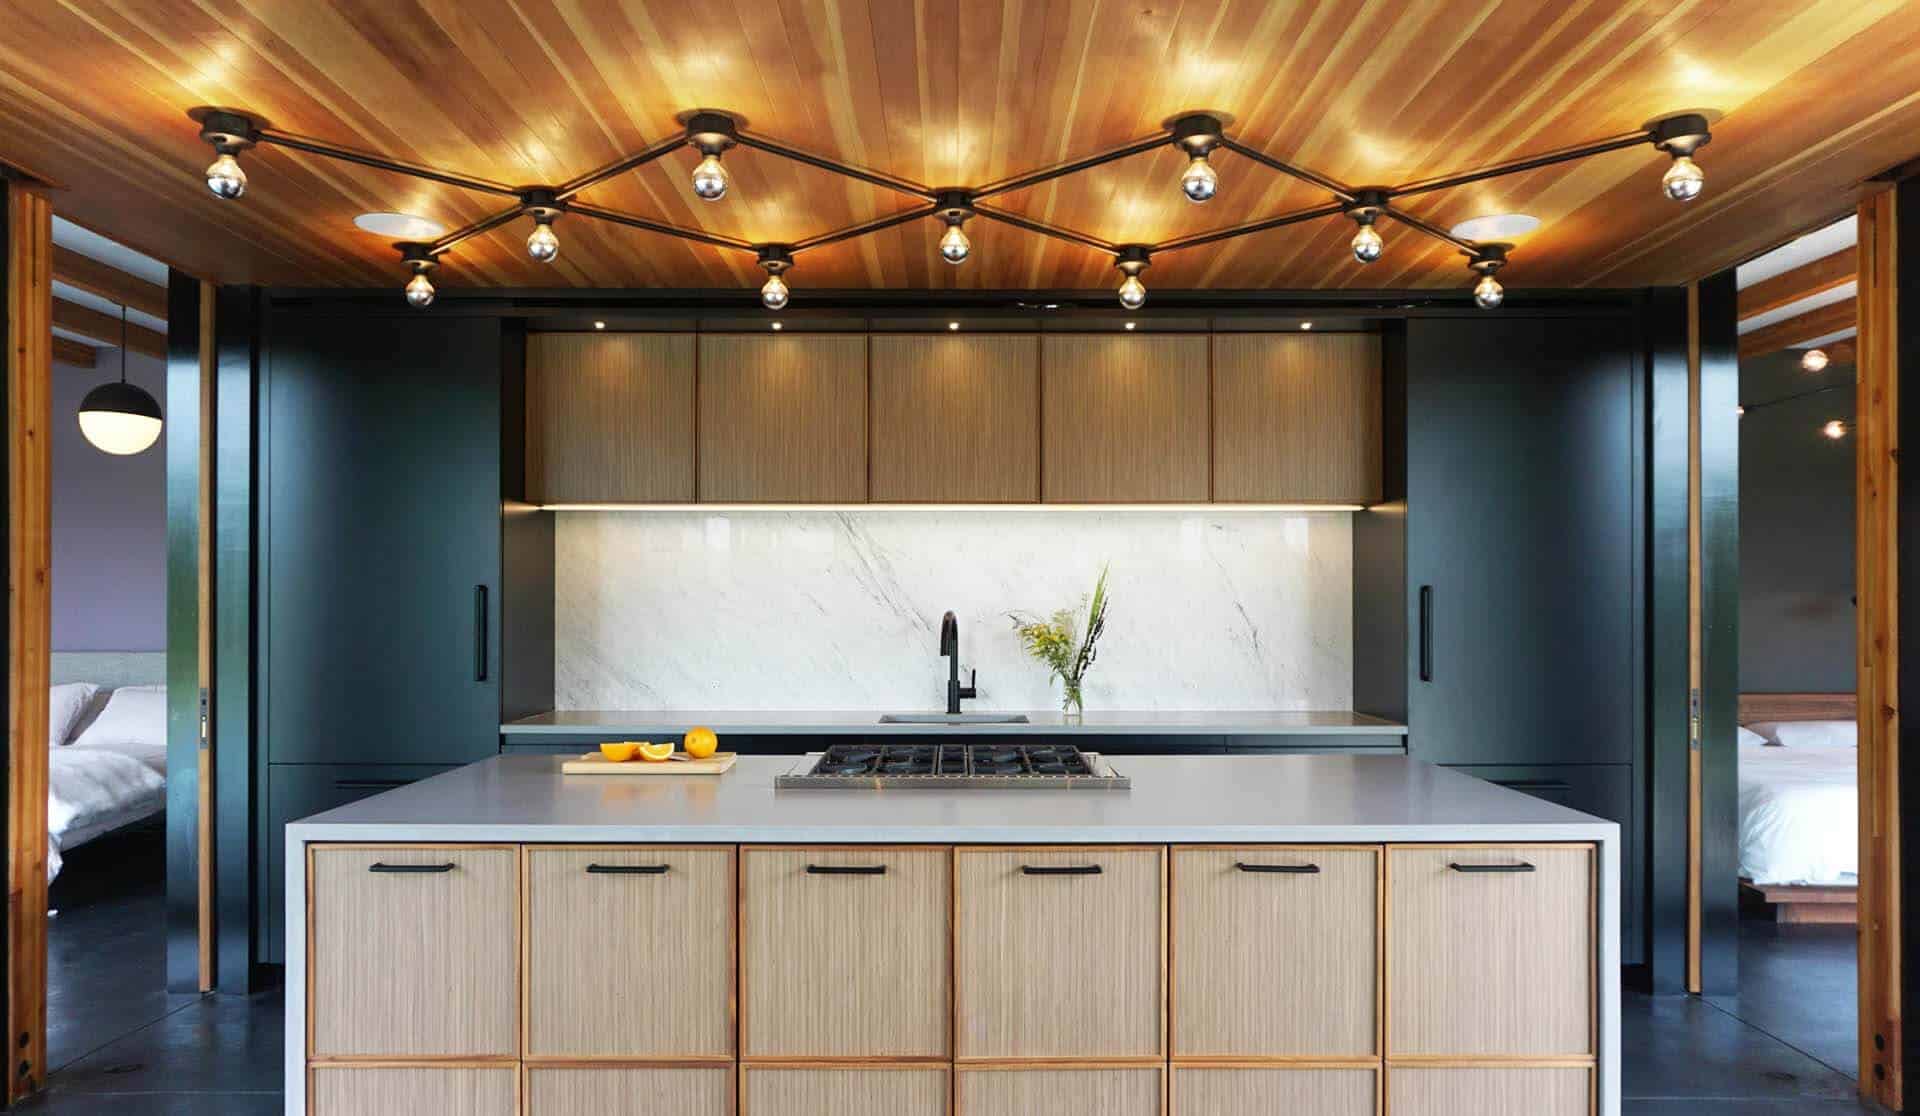 Mid-century modern kitchen features distinctive cabinets of natural walnut quarter-sawn veneer trimmed with walnut solid stock.